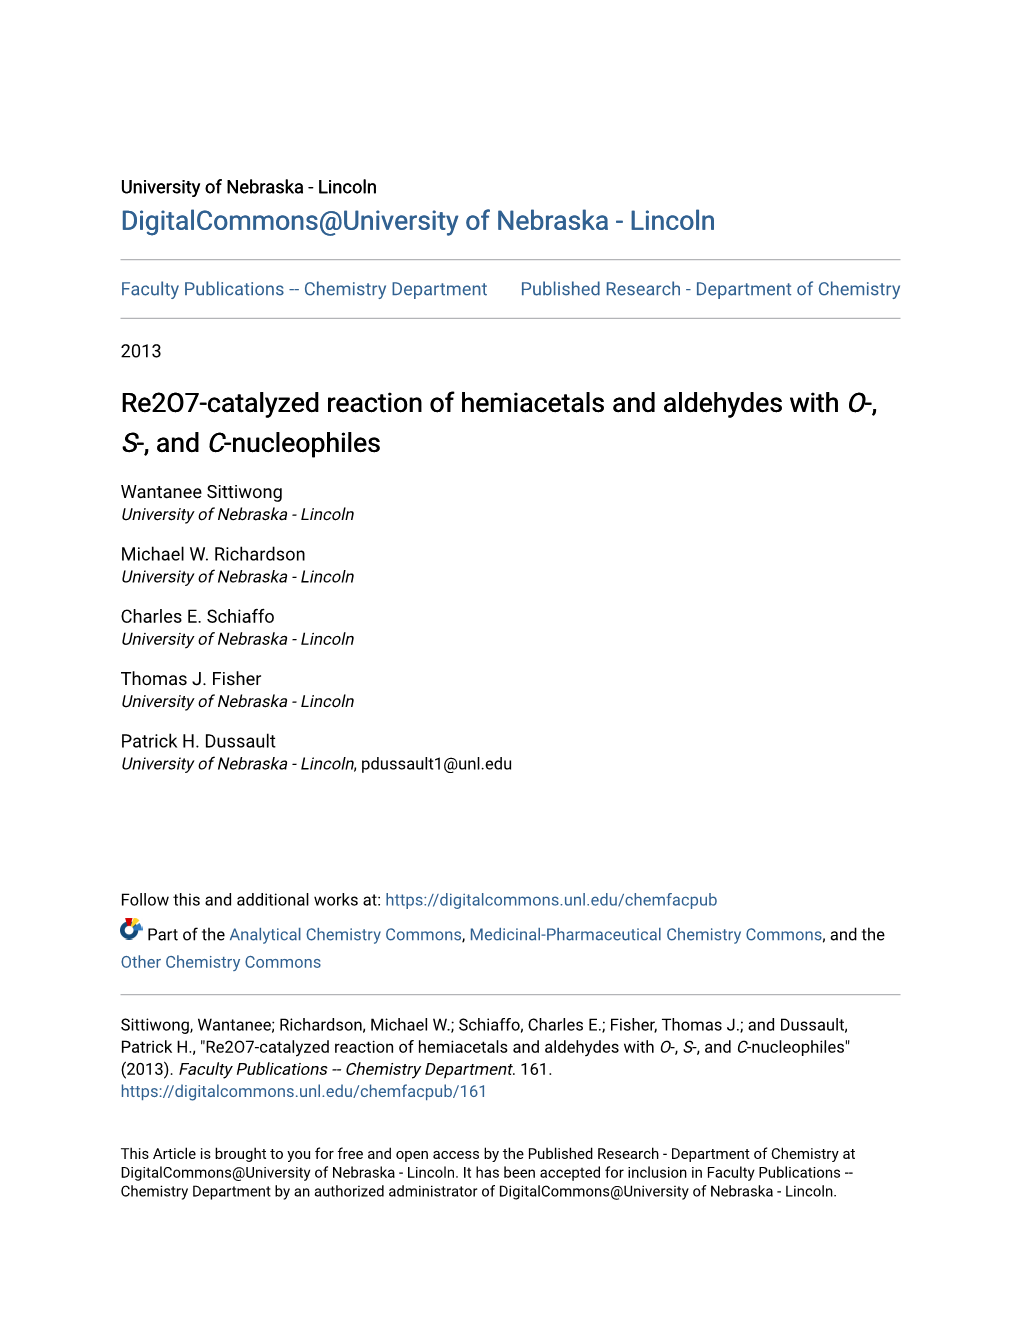 Re2o7-Catalyzed Reaction of Hemiacetals and Aldehydes with &lt;I